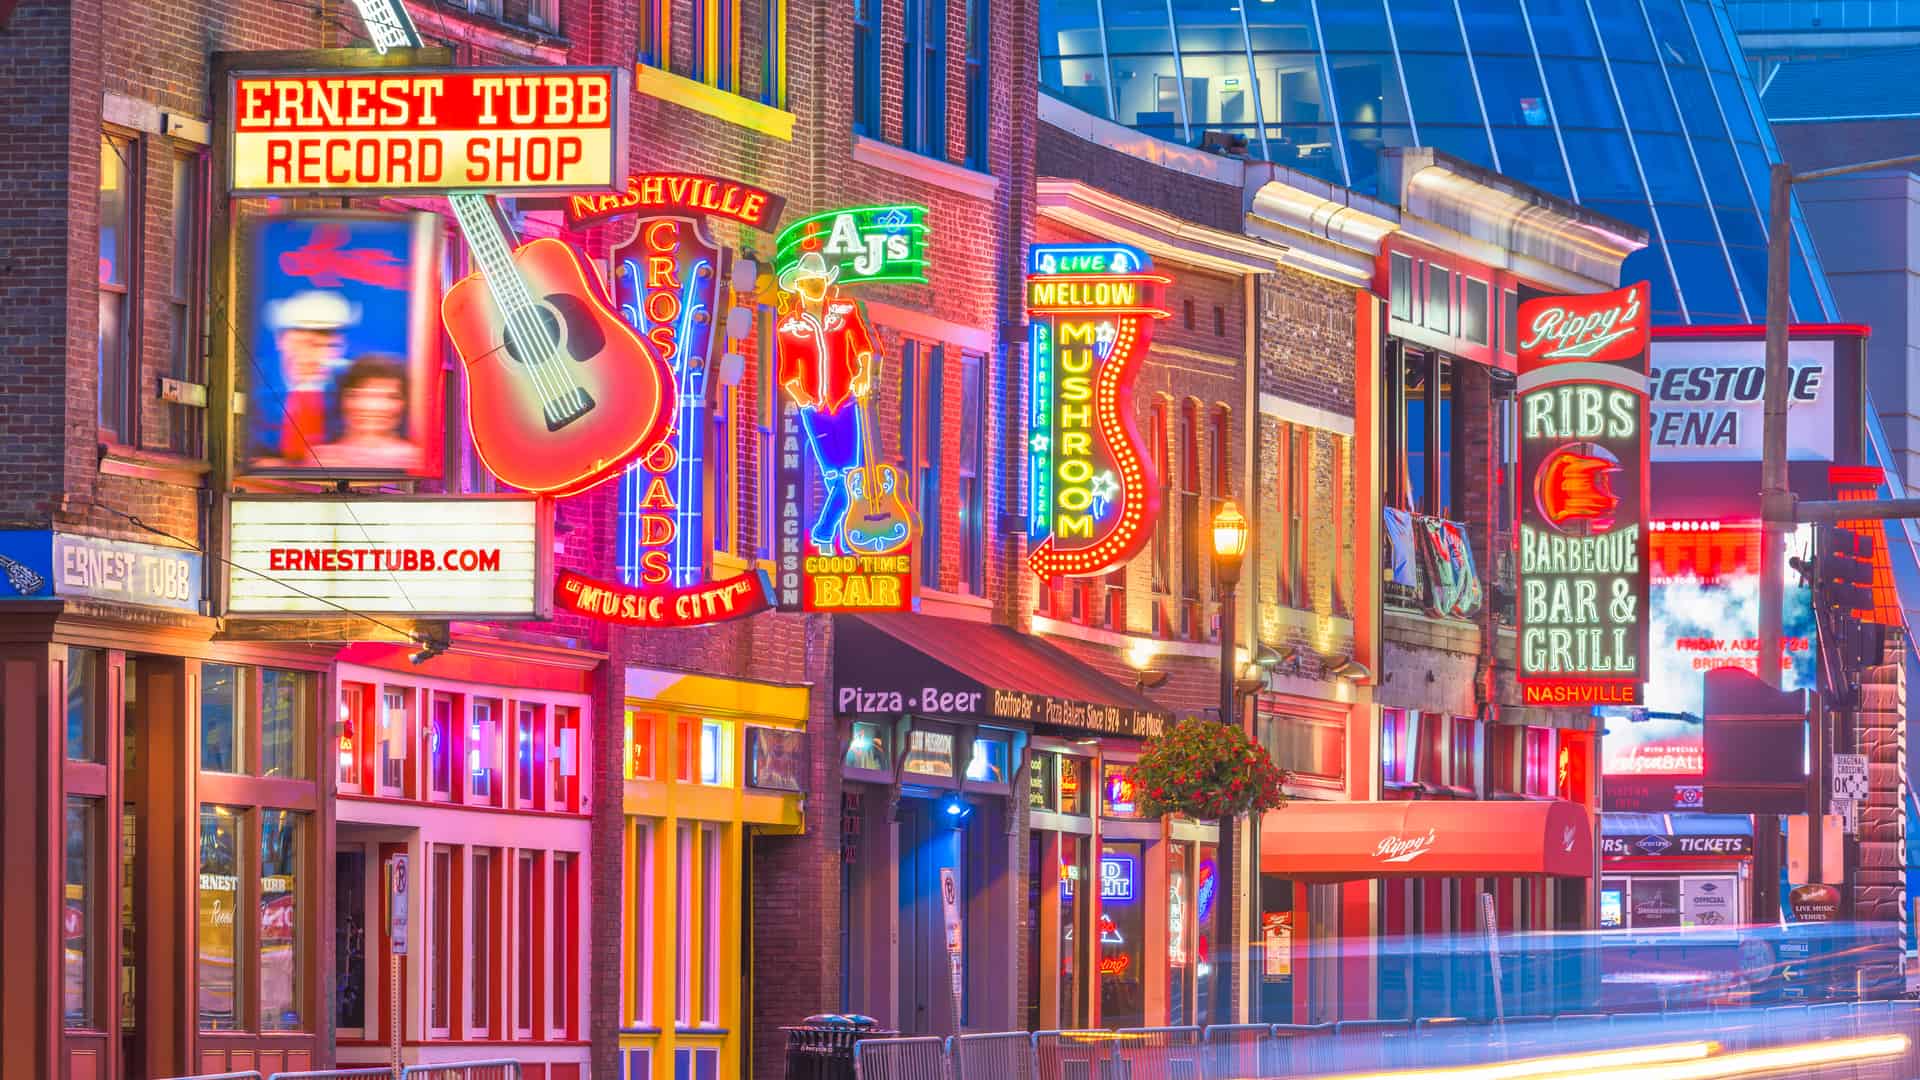 Honky-tonks on Lower Broadway in Nashville, Tennessee. District is famous for country music entertainment establishments.